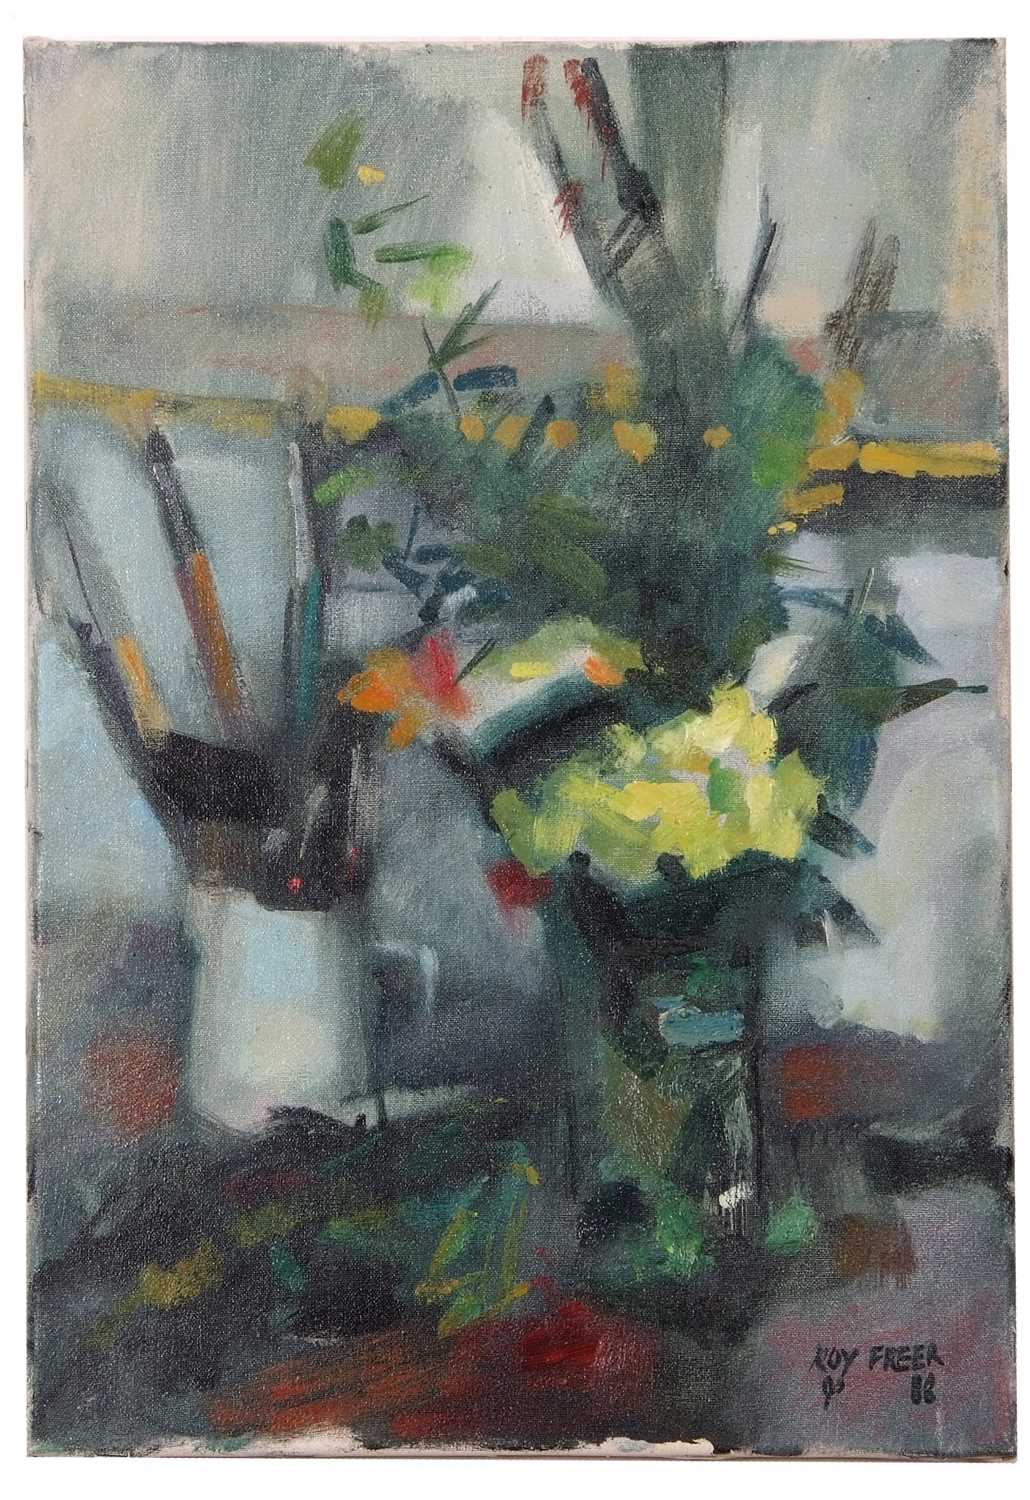 Roy Freer ROI (1938-2021) "Flowers & Bushes", oil on canvas, signed and dtaed '88, 36X51cm,